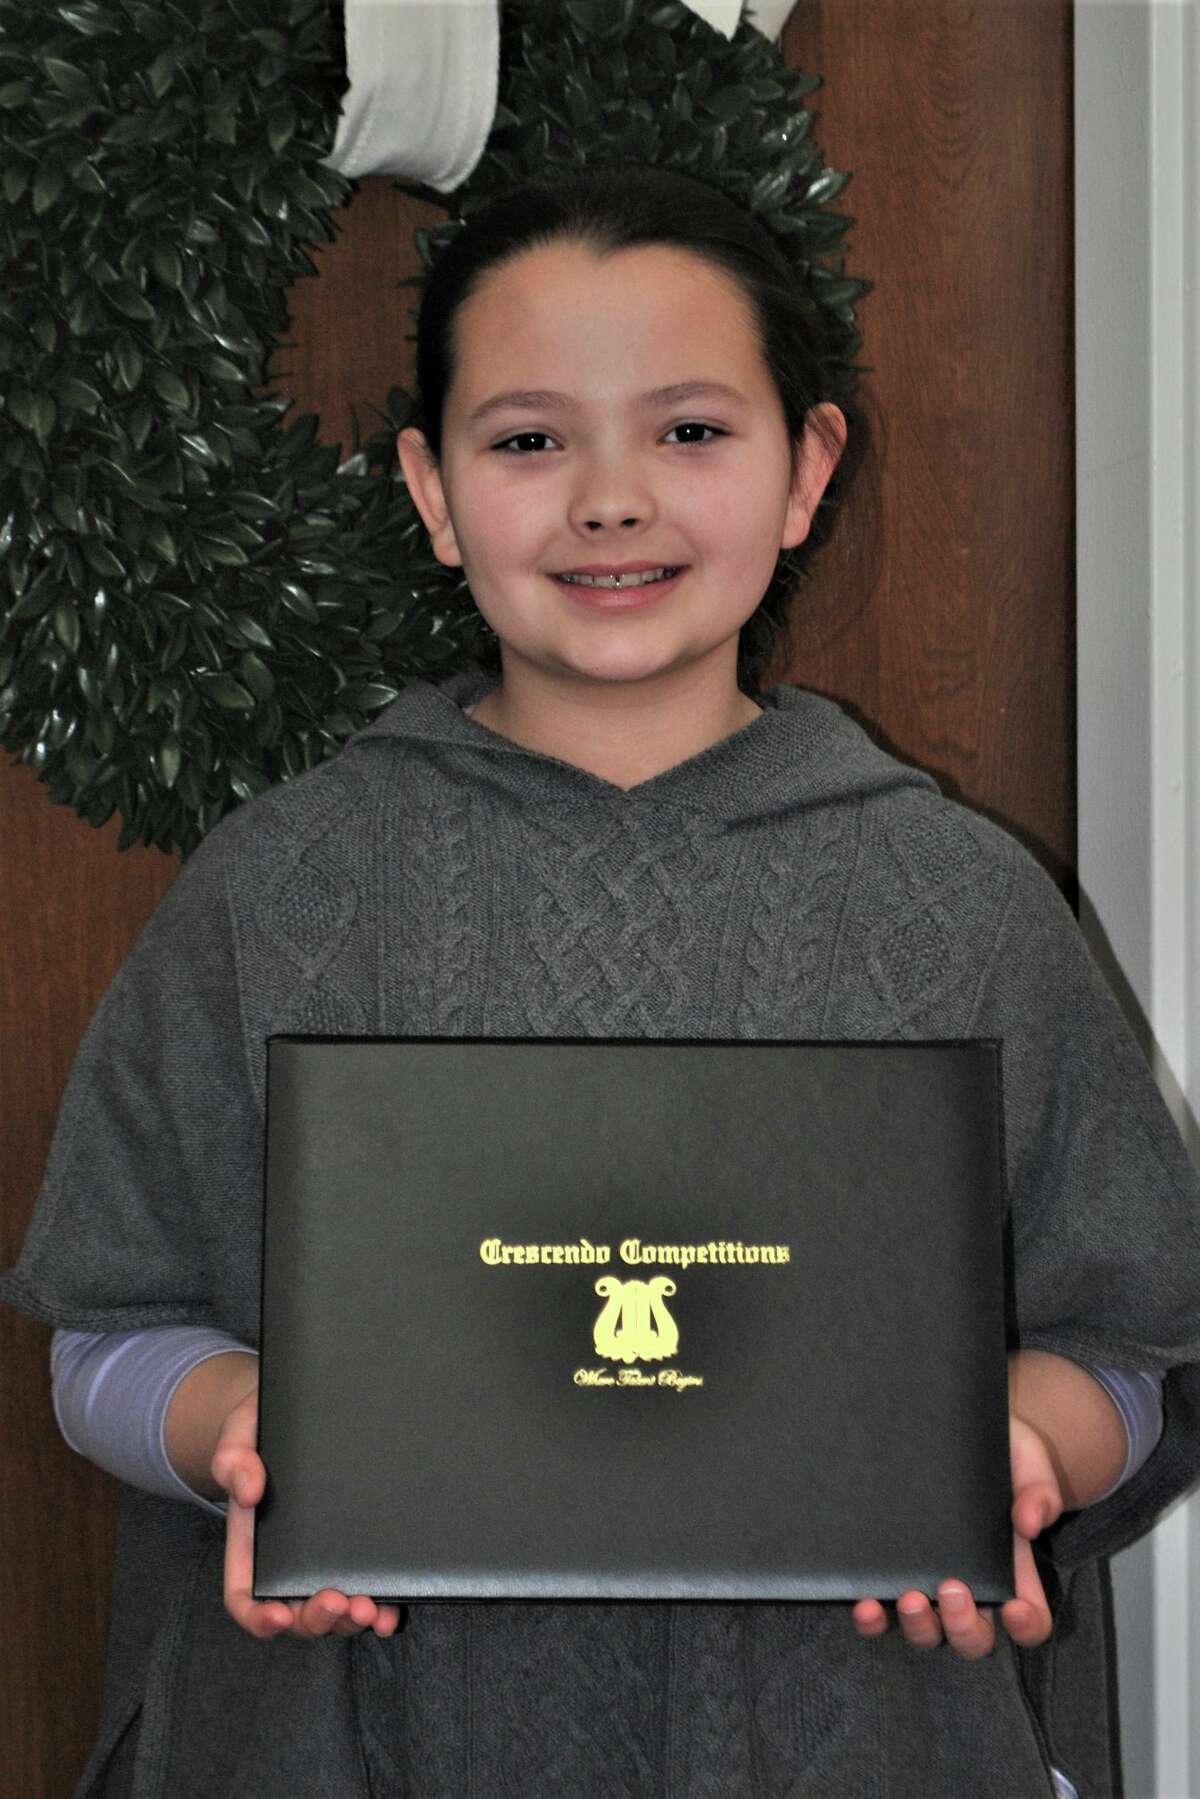 Lucia Trudo, a fifth grader at King Street Elementary School in Danbury, was chosen to paly piano at Carnegie Hall in February 2020.